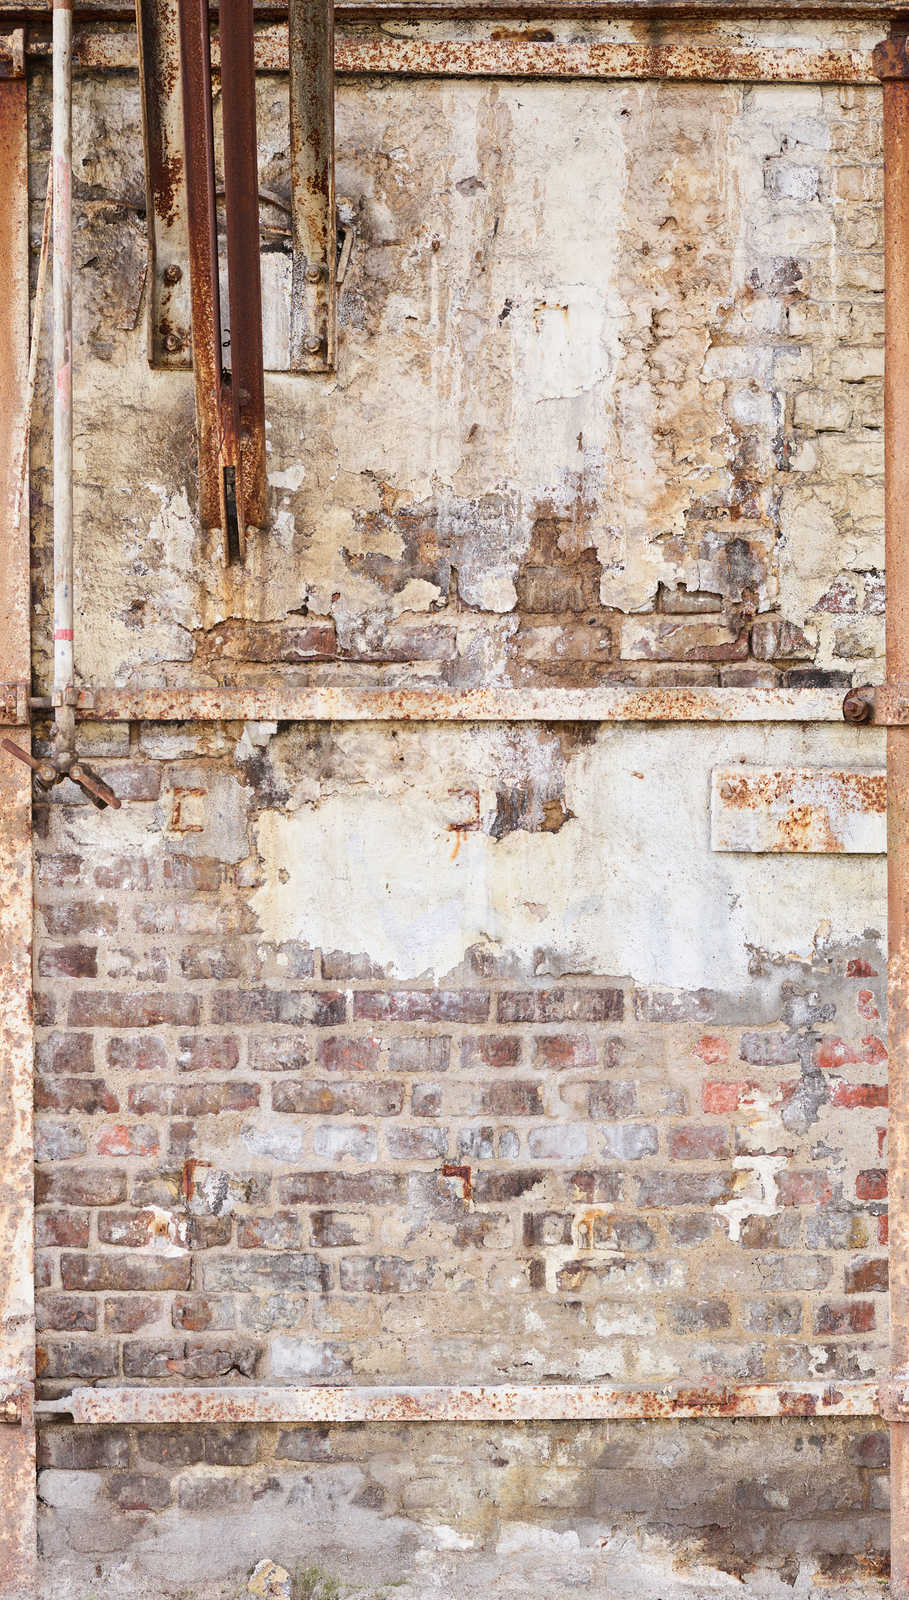             Non-woven wallpaper old brick wall with rusty metal frame - cream, brown, beige
        